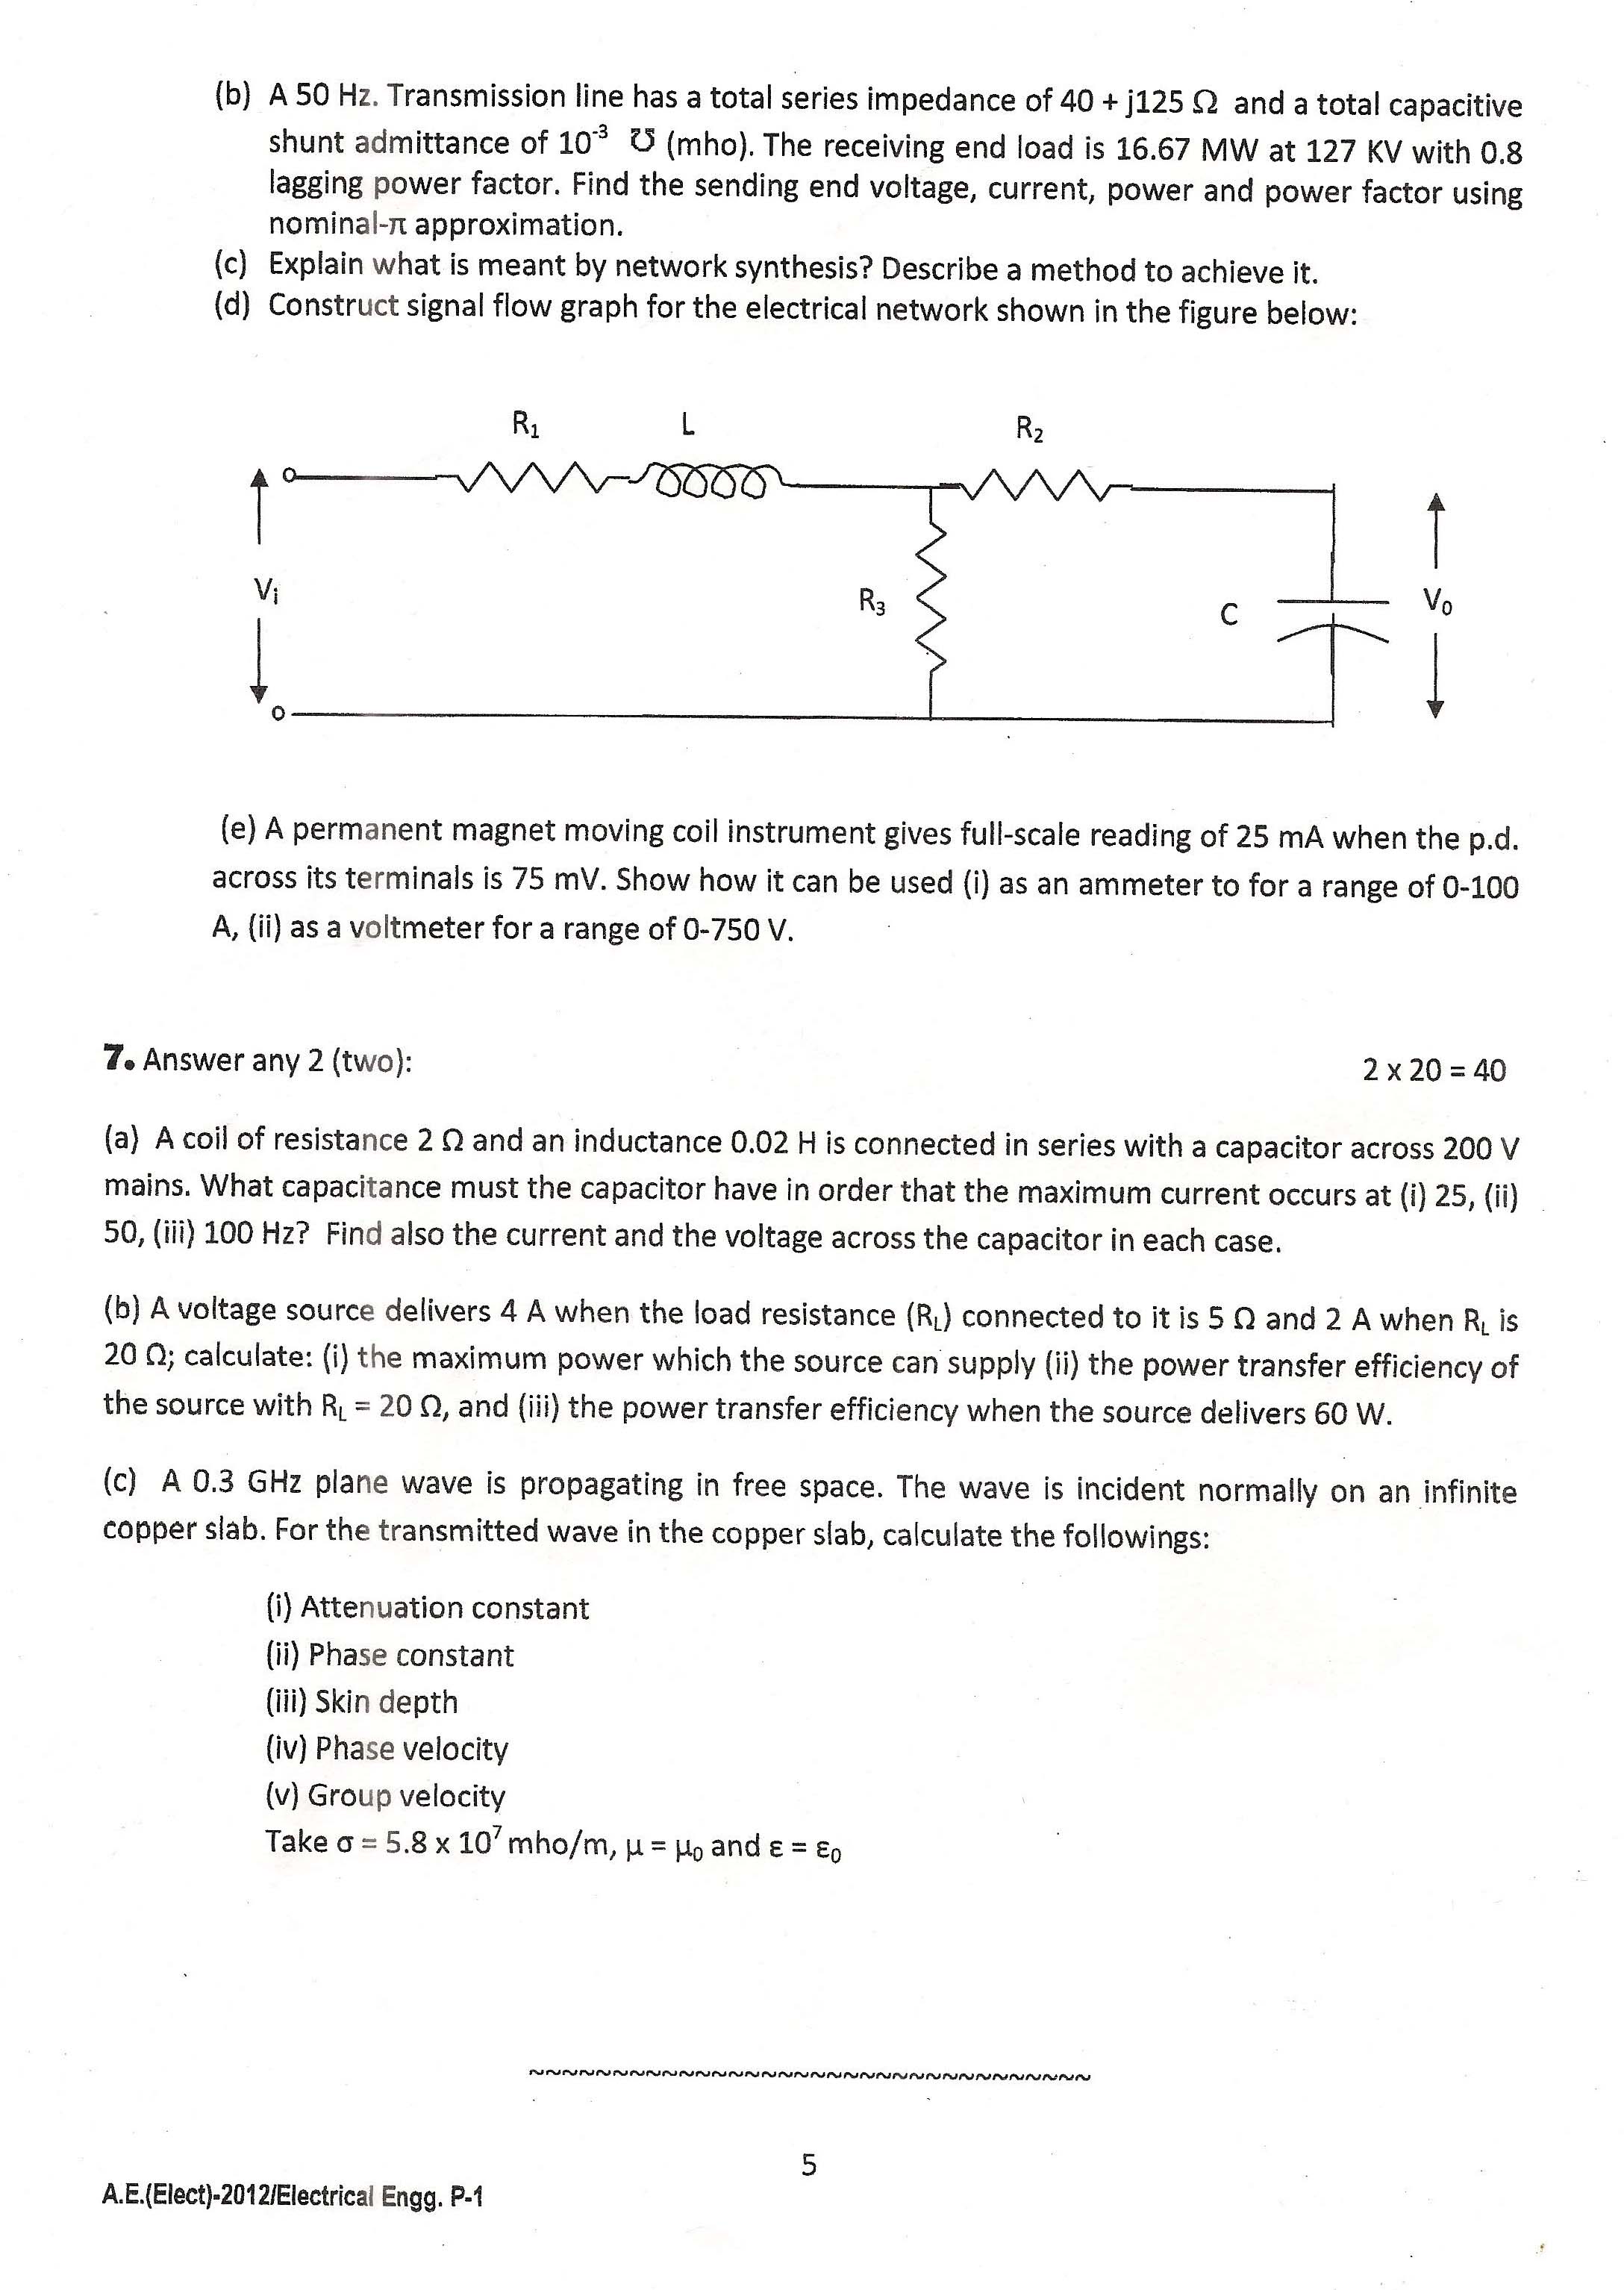 APPSC AE Electrical Exam 2012 Electrical Engineering Paper I 5